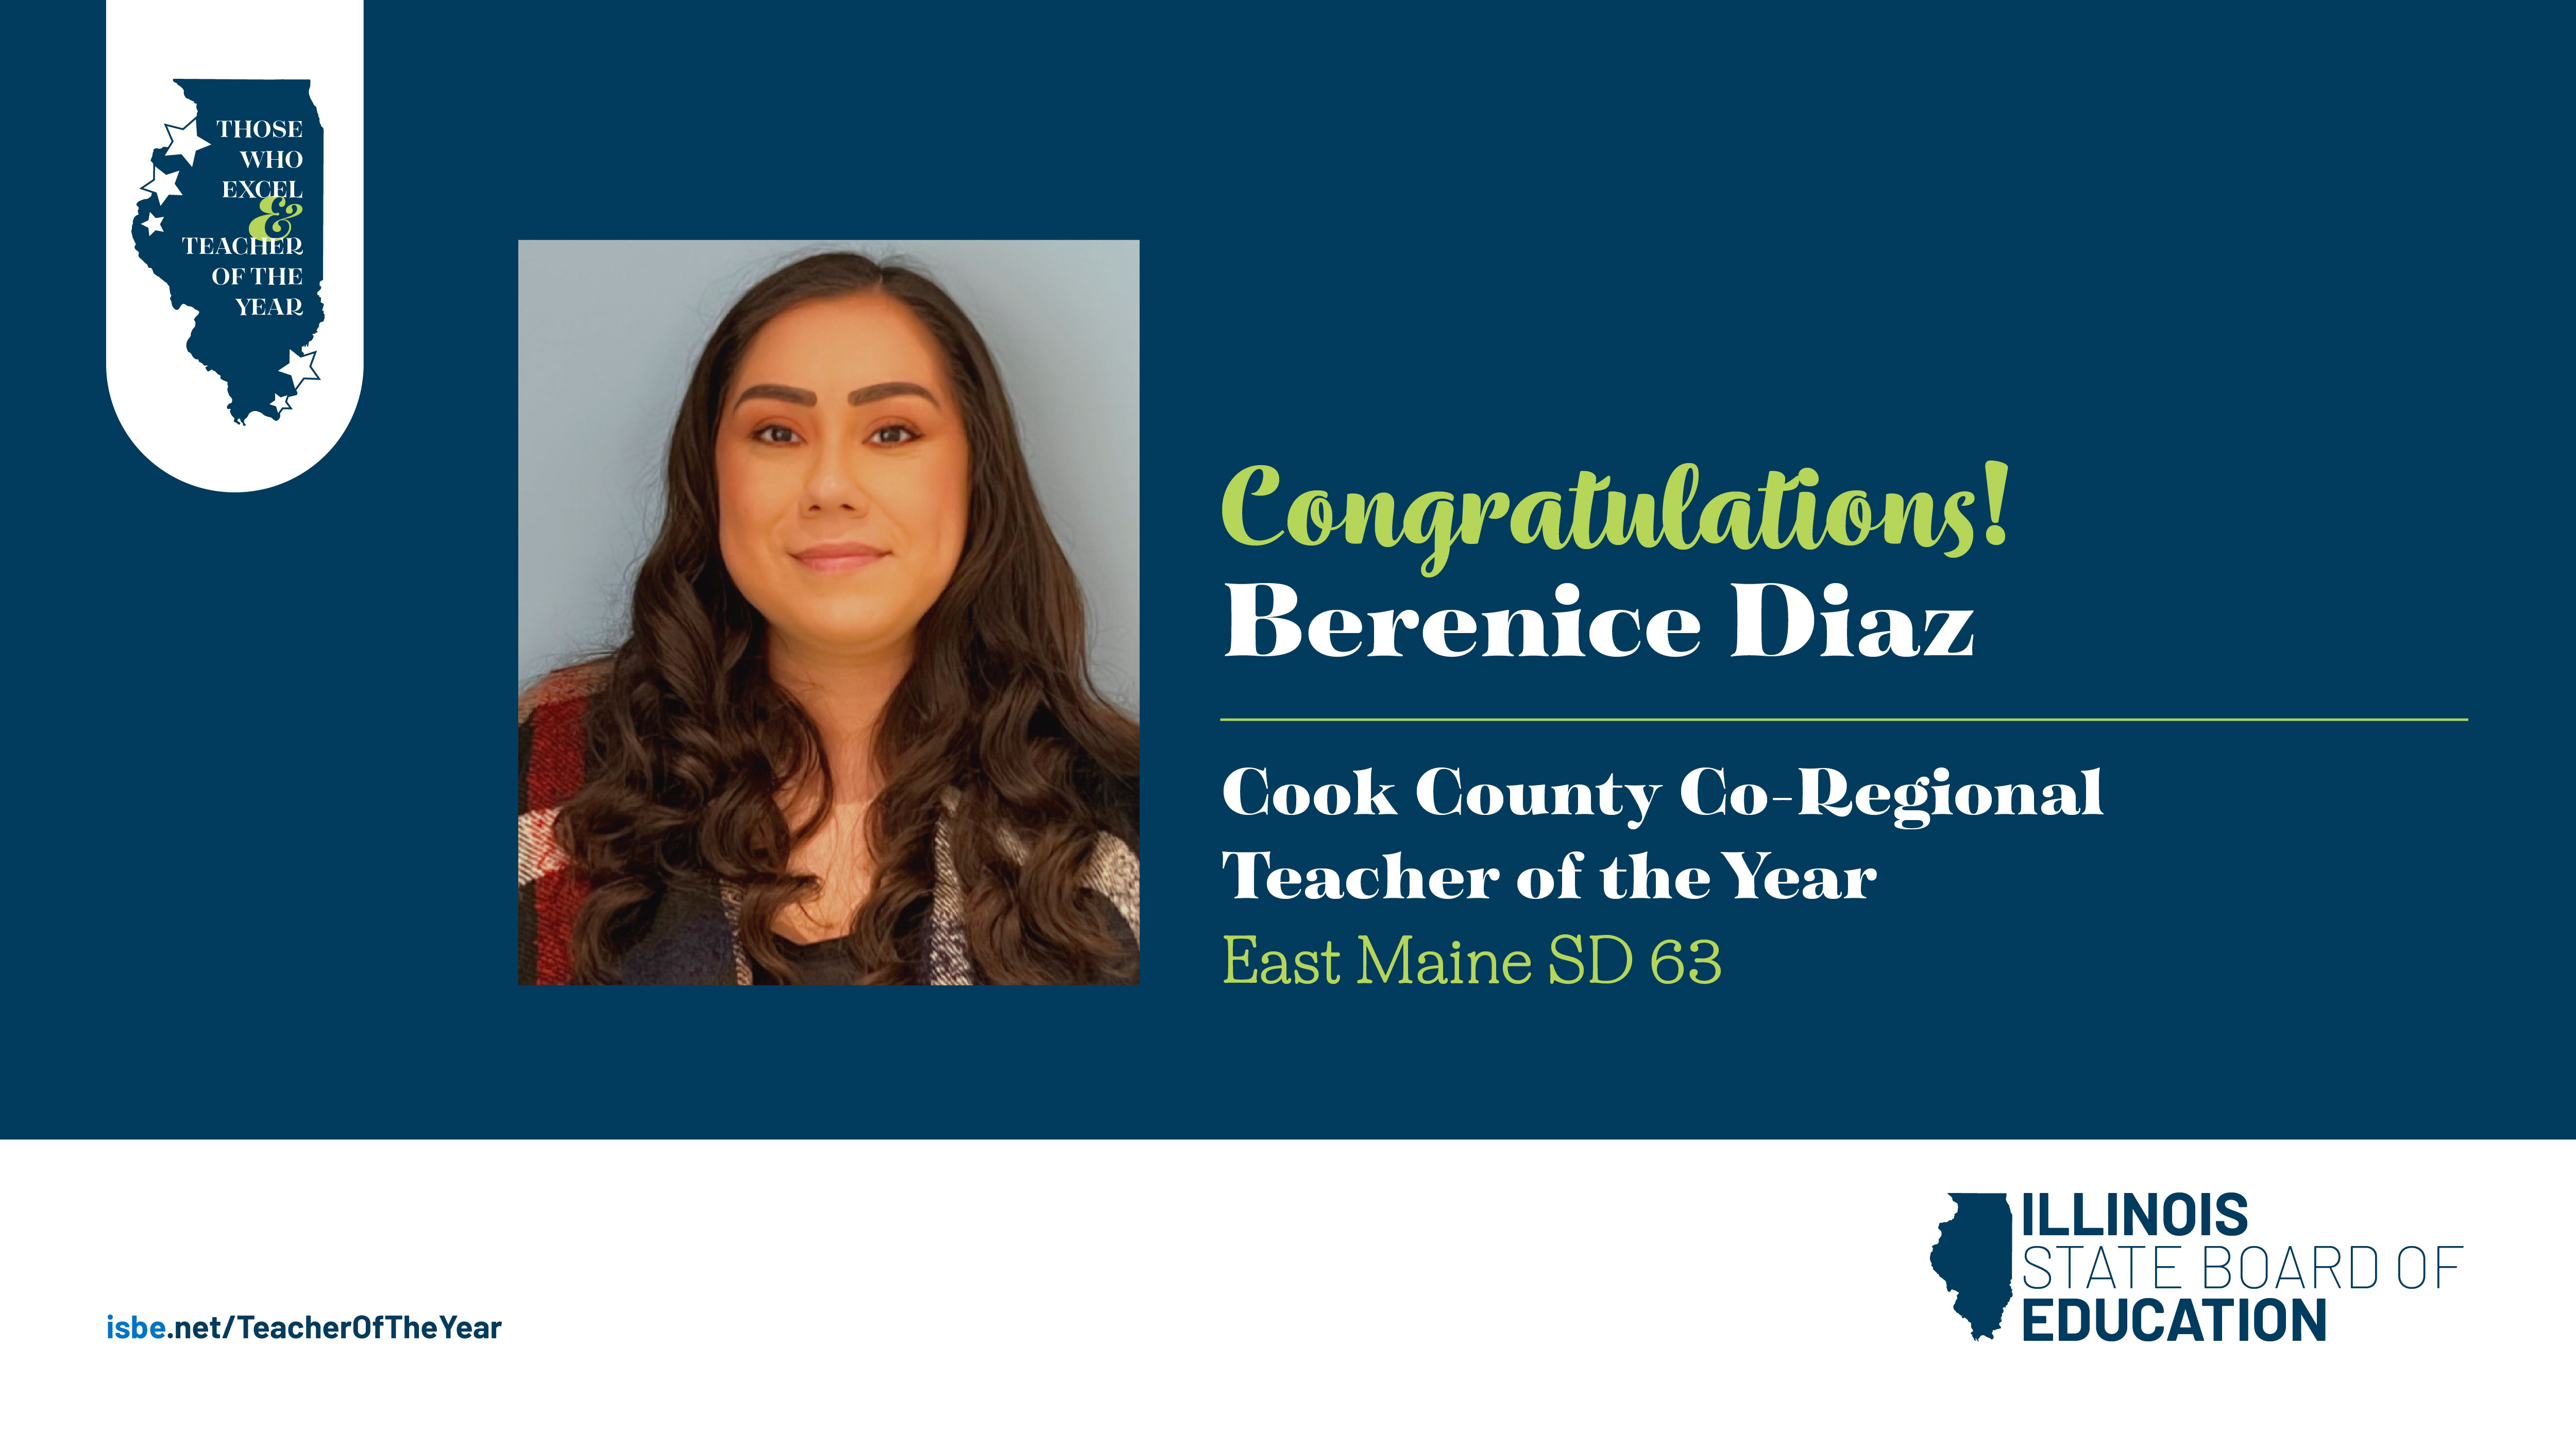 Congratulations! Berenice Diaz, Cook County Co-Regional teacher of the year from East Maine SD 63. Headshot of Berenice Diaz